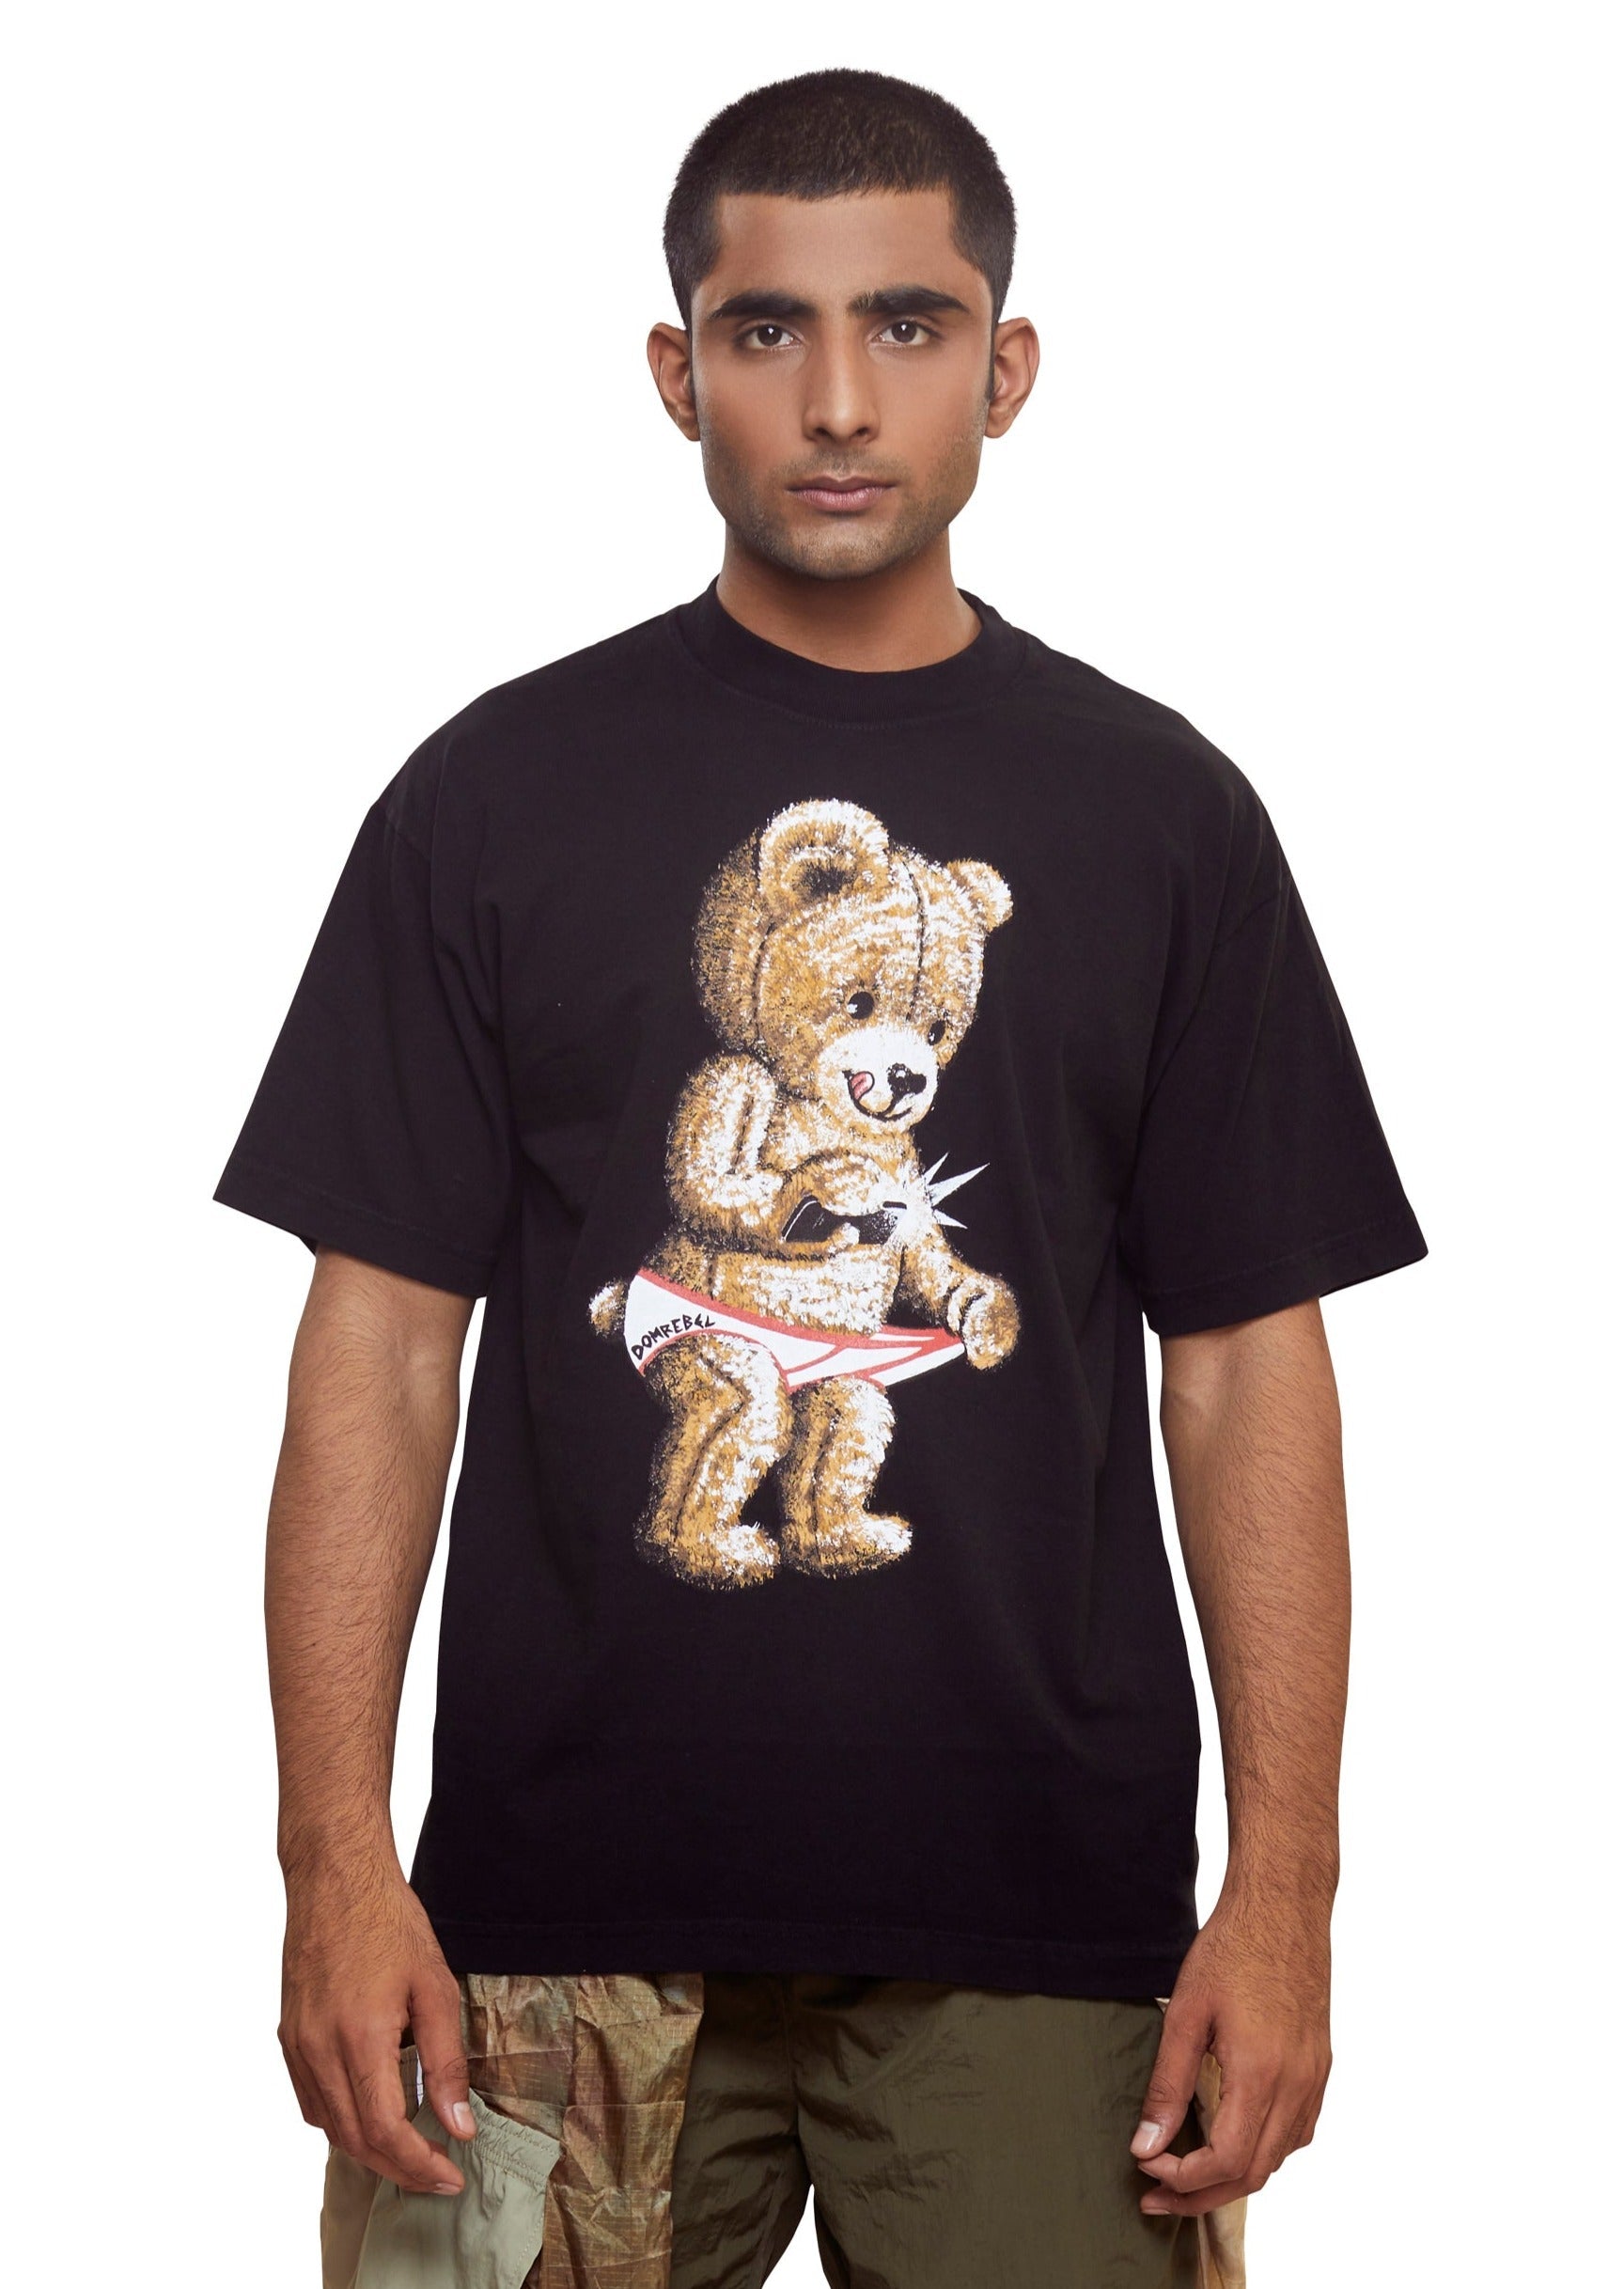 Black Graphic t-shirt by Dom Rebel in a medium weight 100% cotton fabric with a teddy bear print from the brand Domrebel